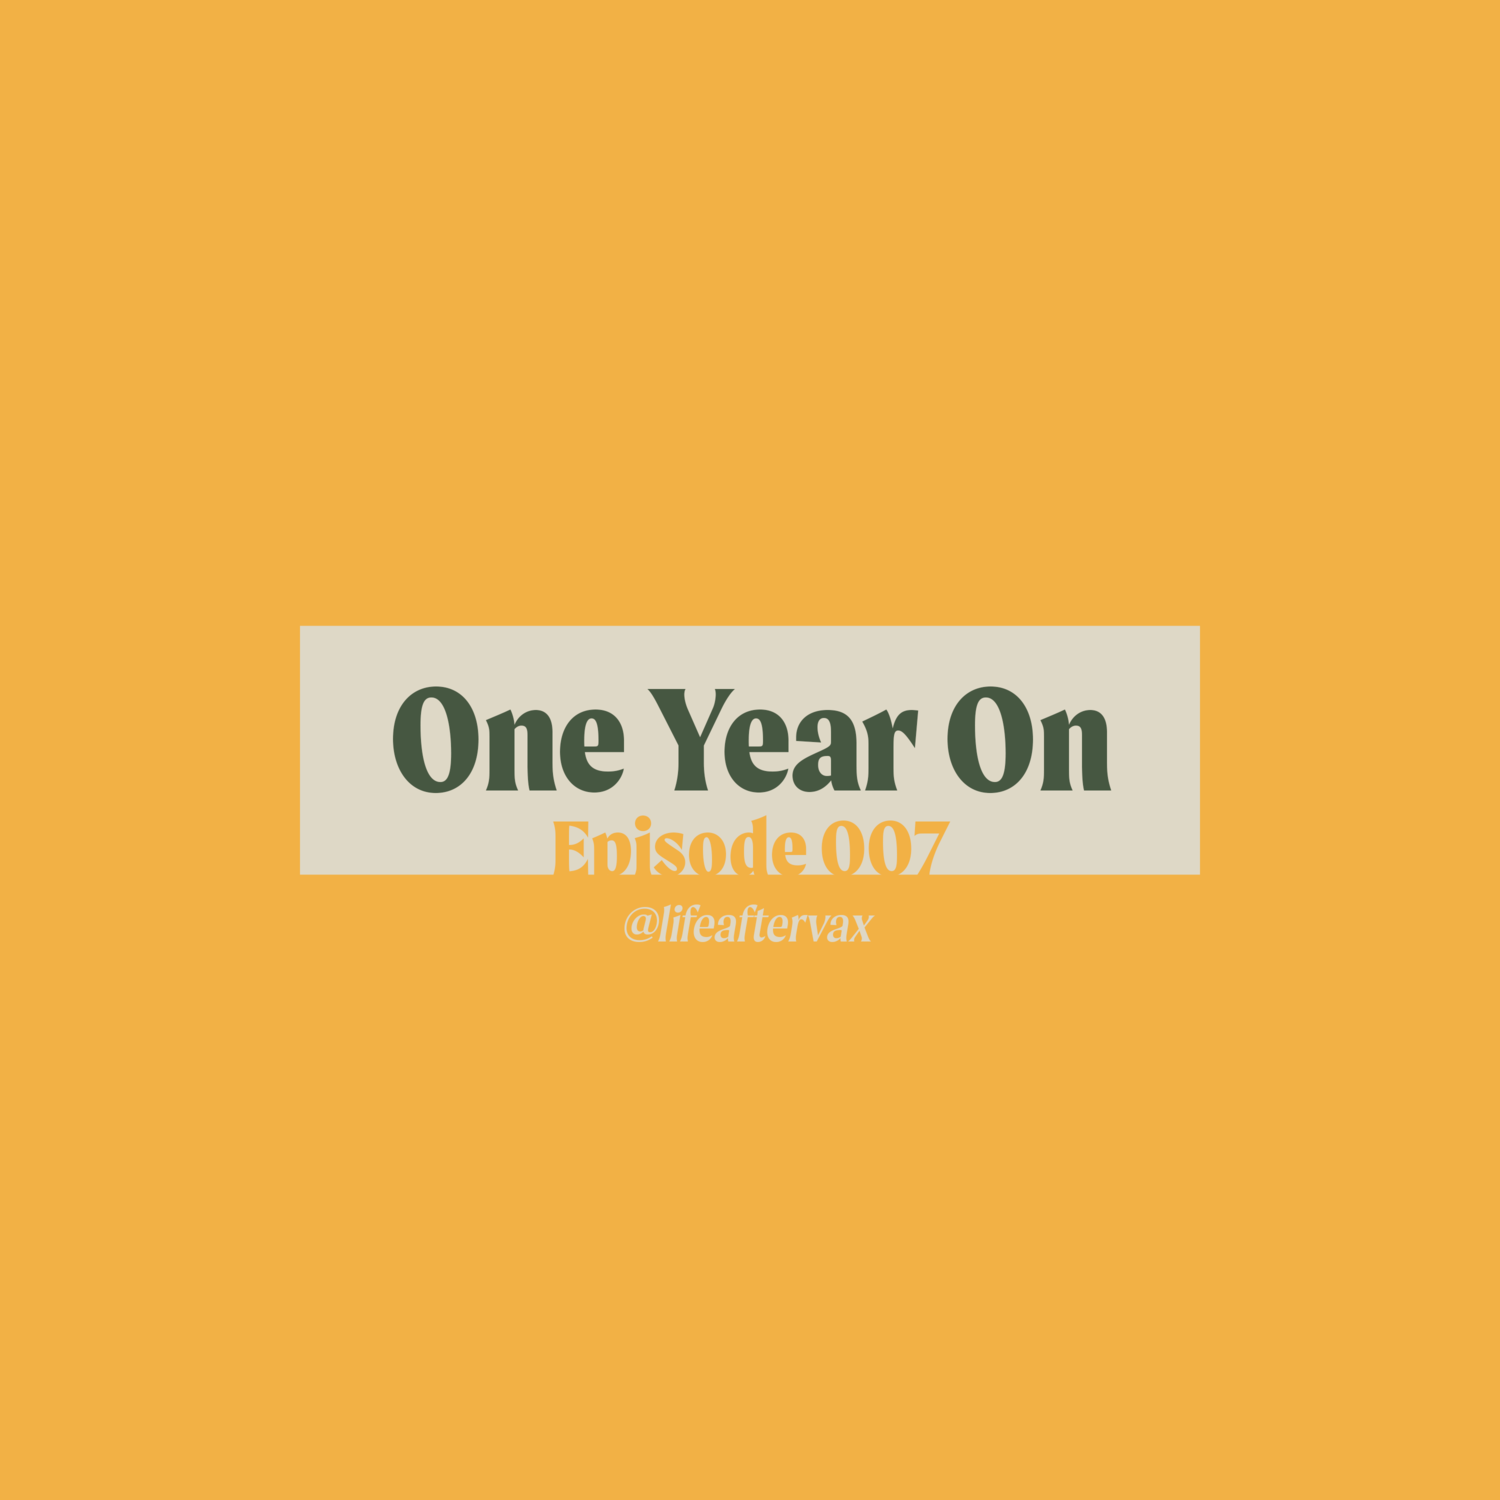 Episode 007 - One Year On